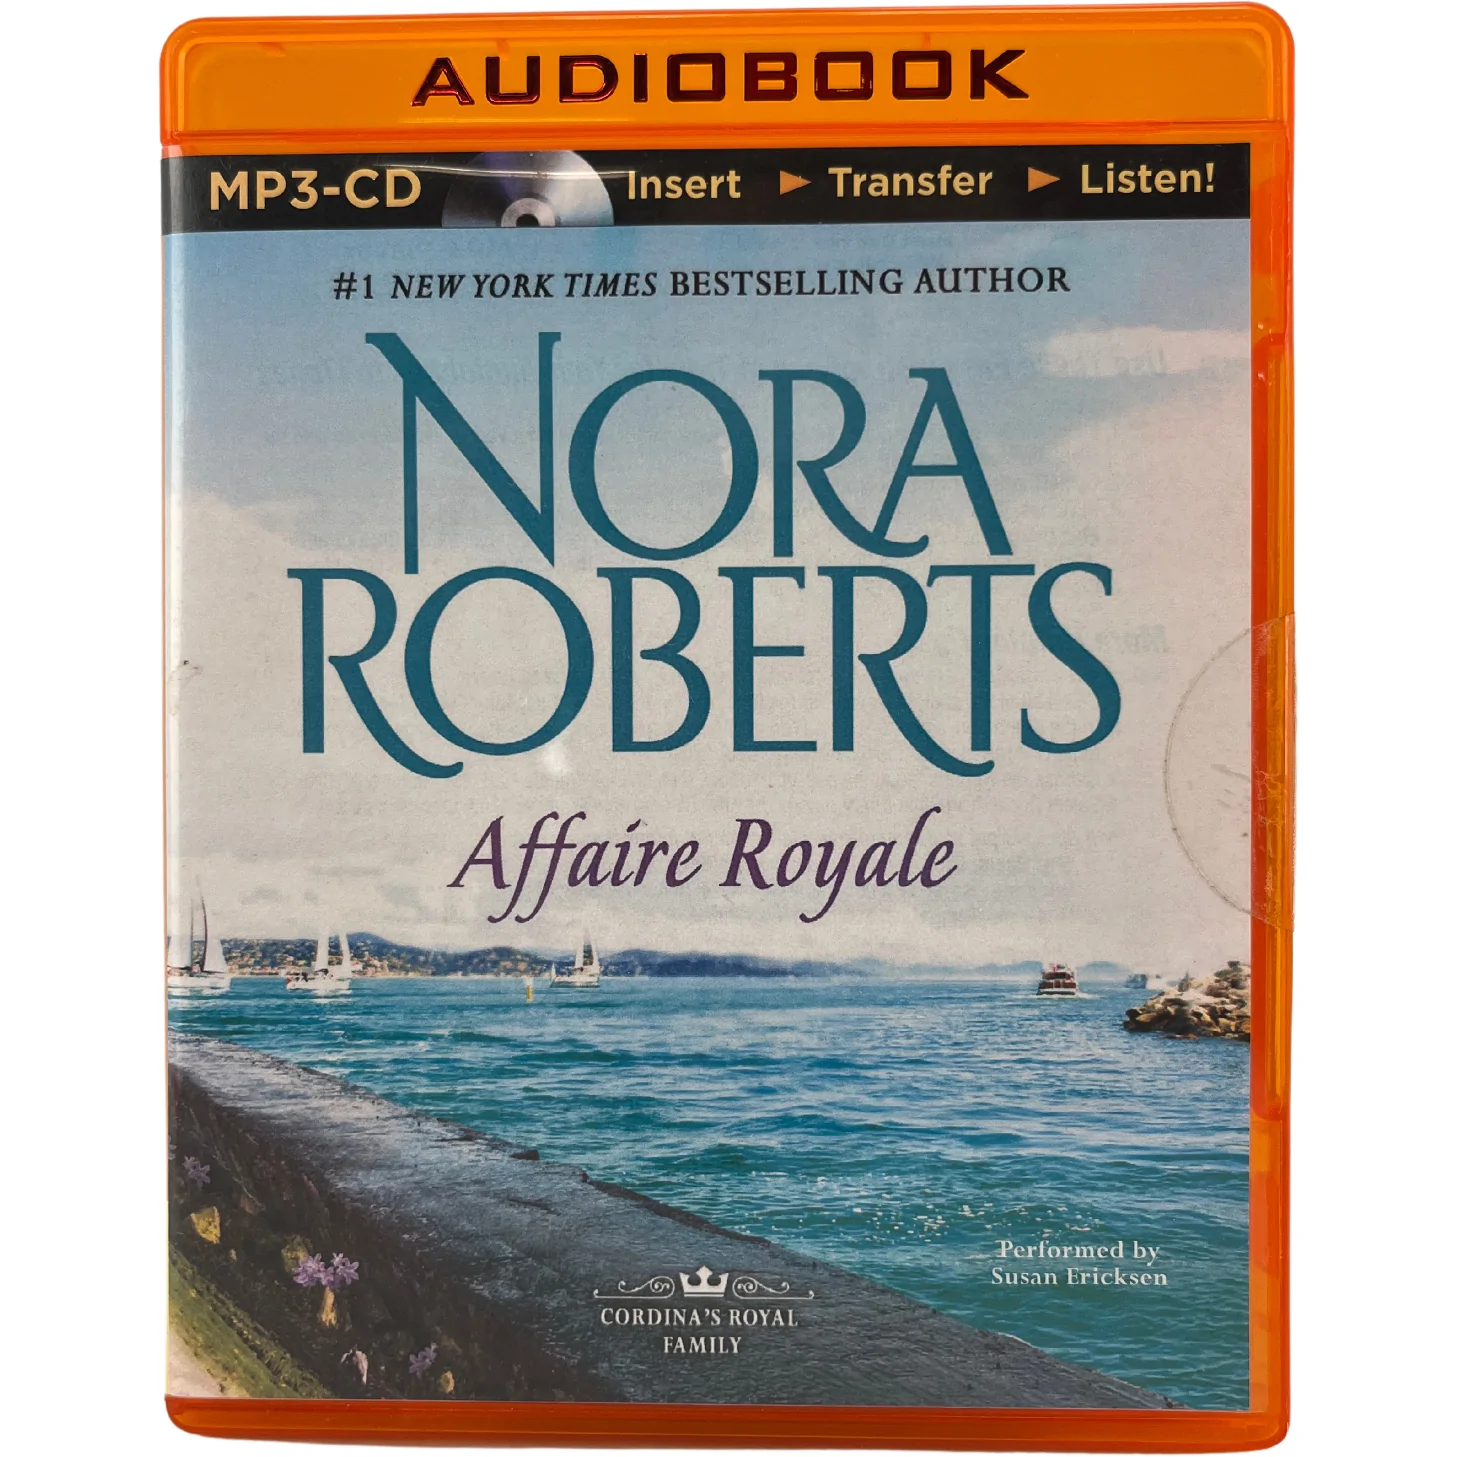 Audiobook "Affaire Royale" / Author Nora Roberts / MP3-CD